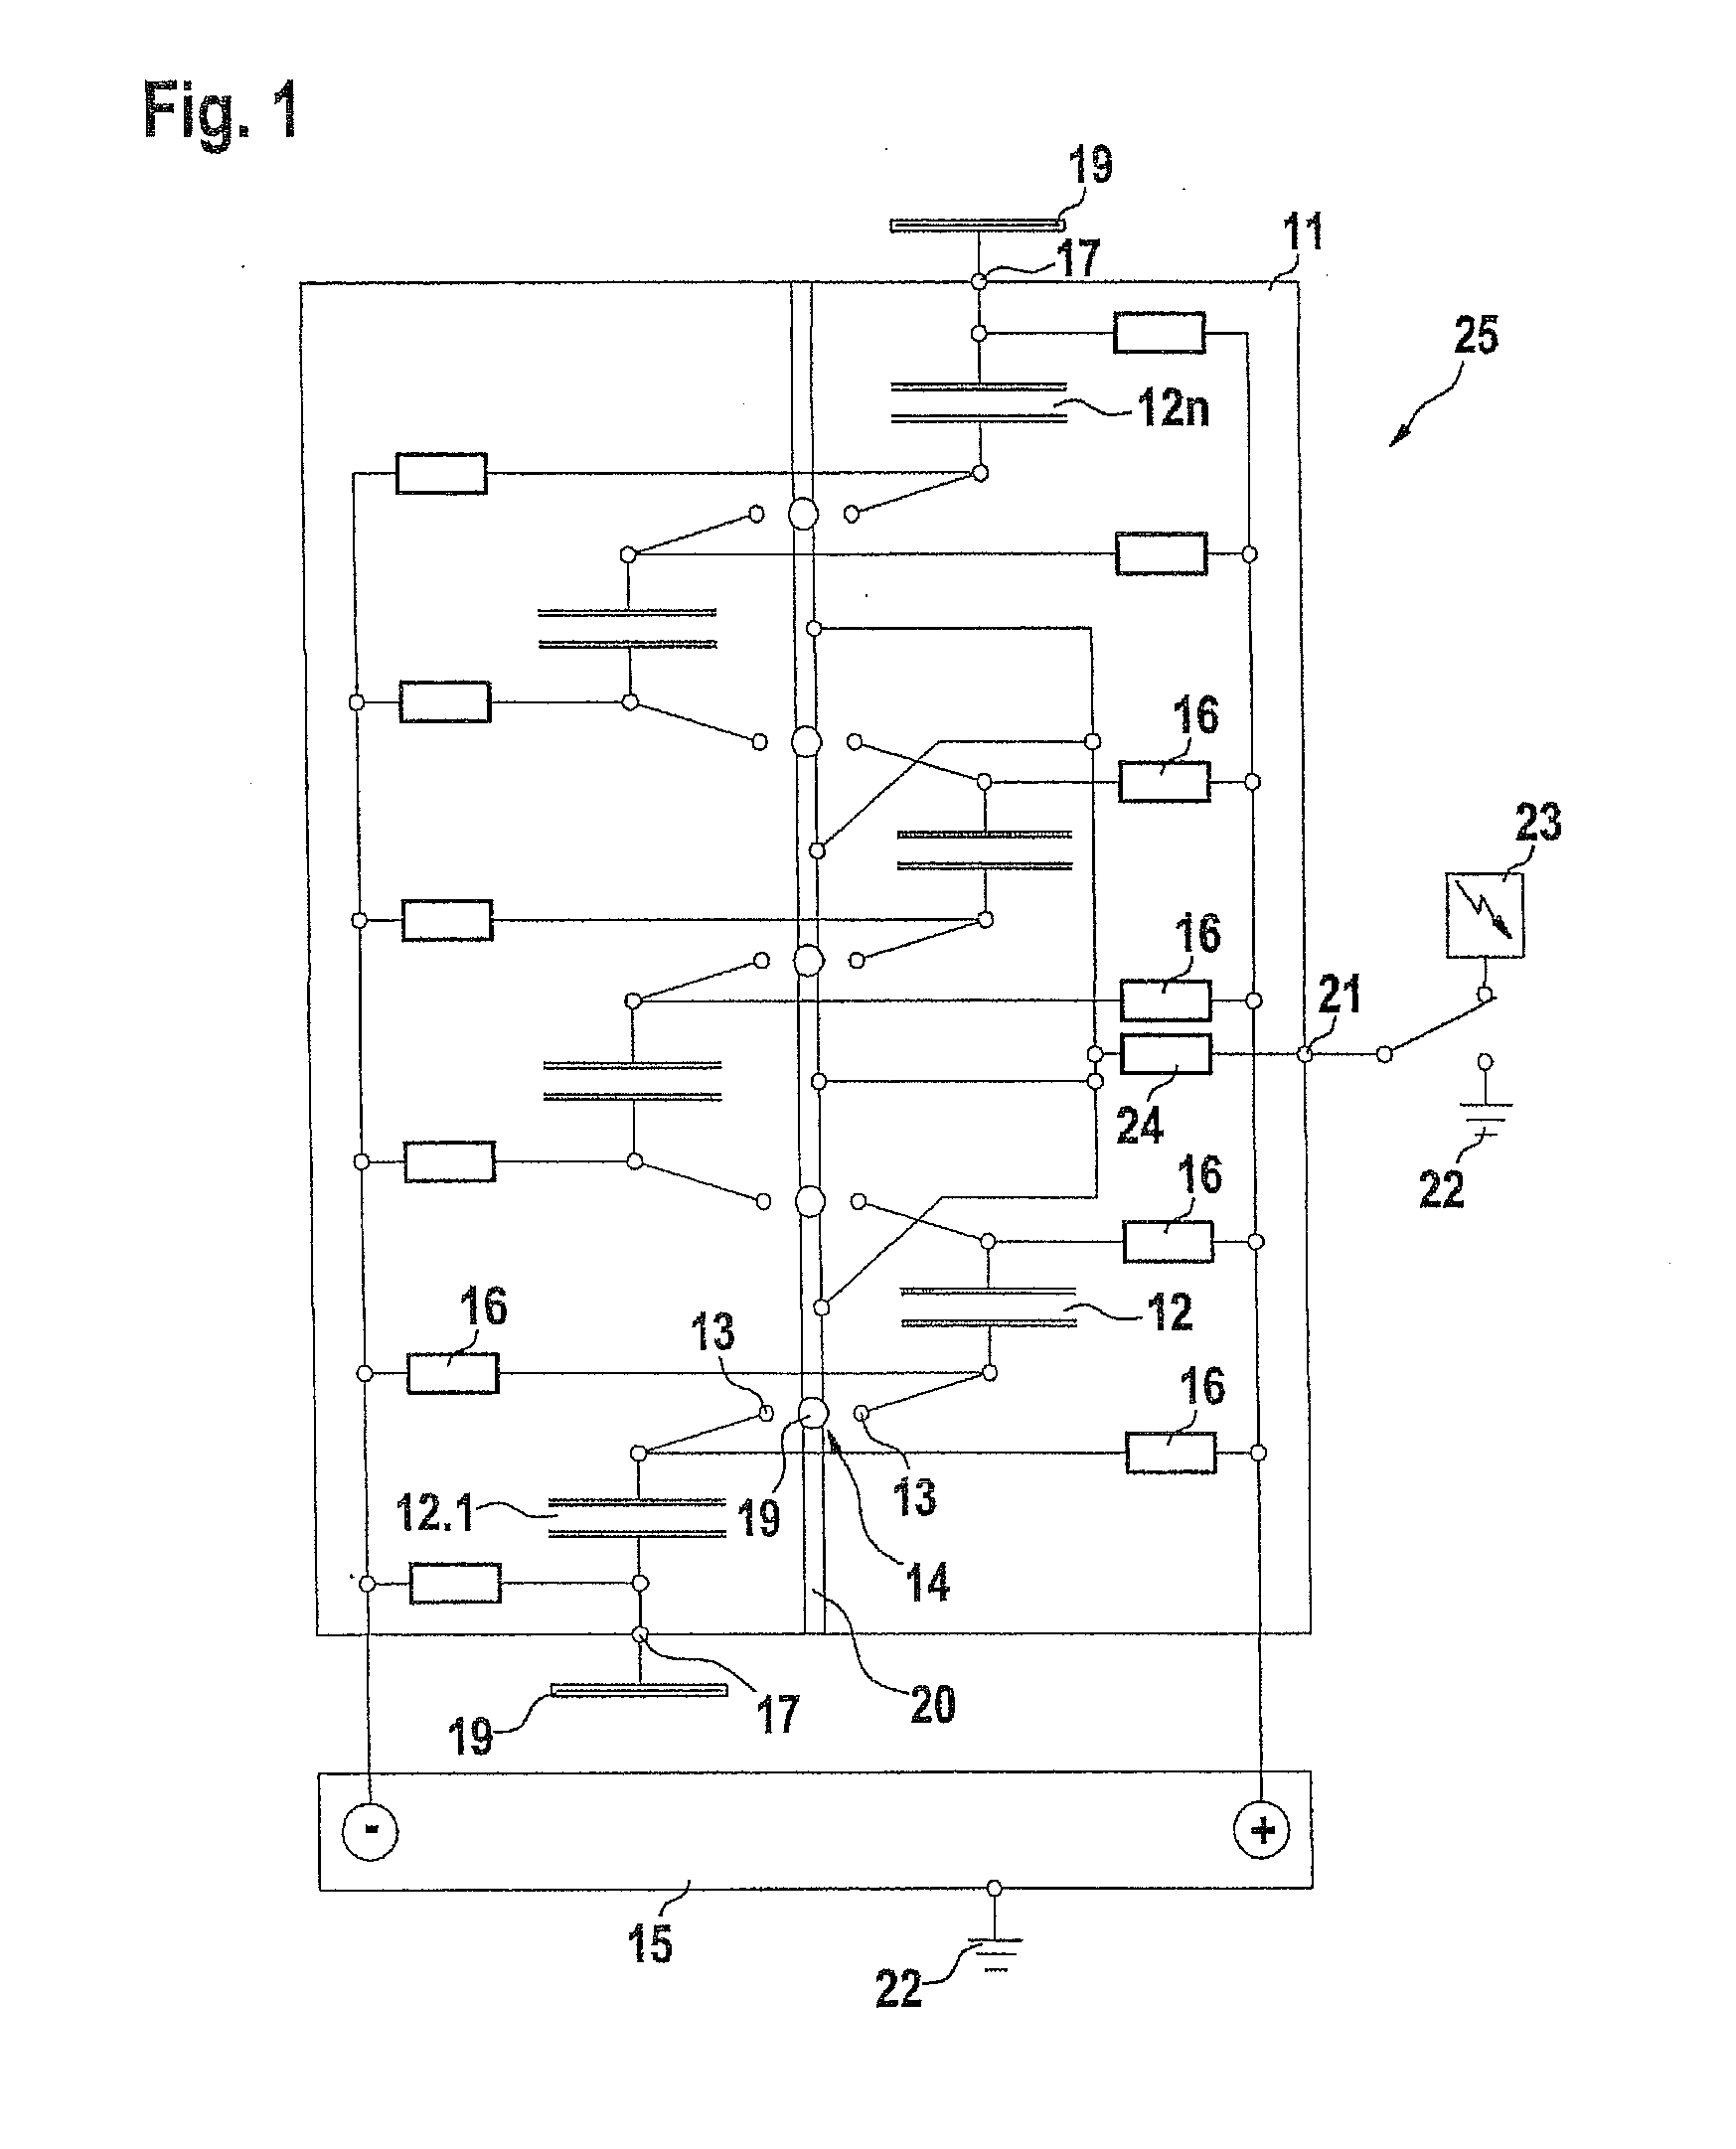 Method and device for production and emission of a high-power microwave pulse